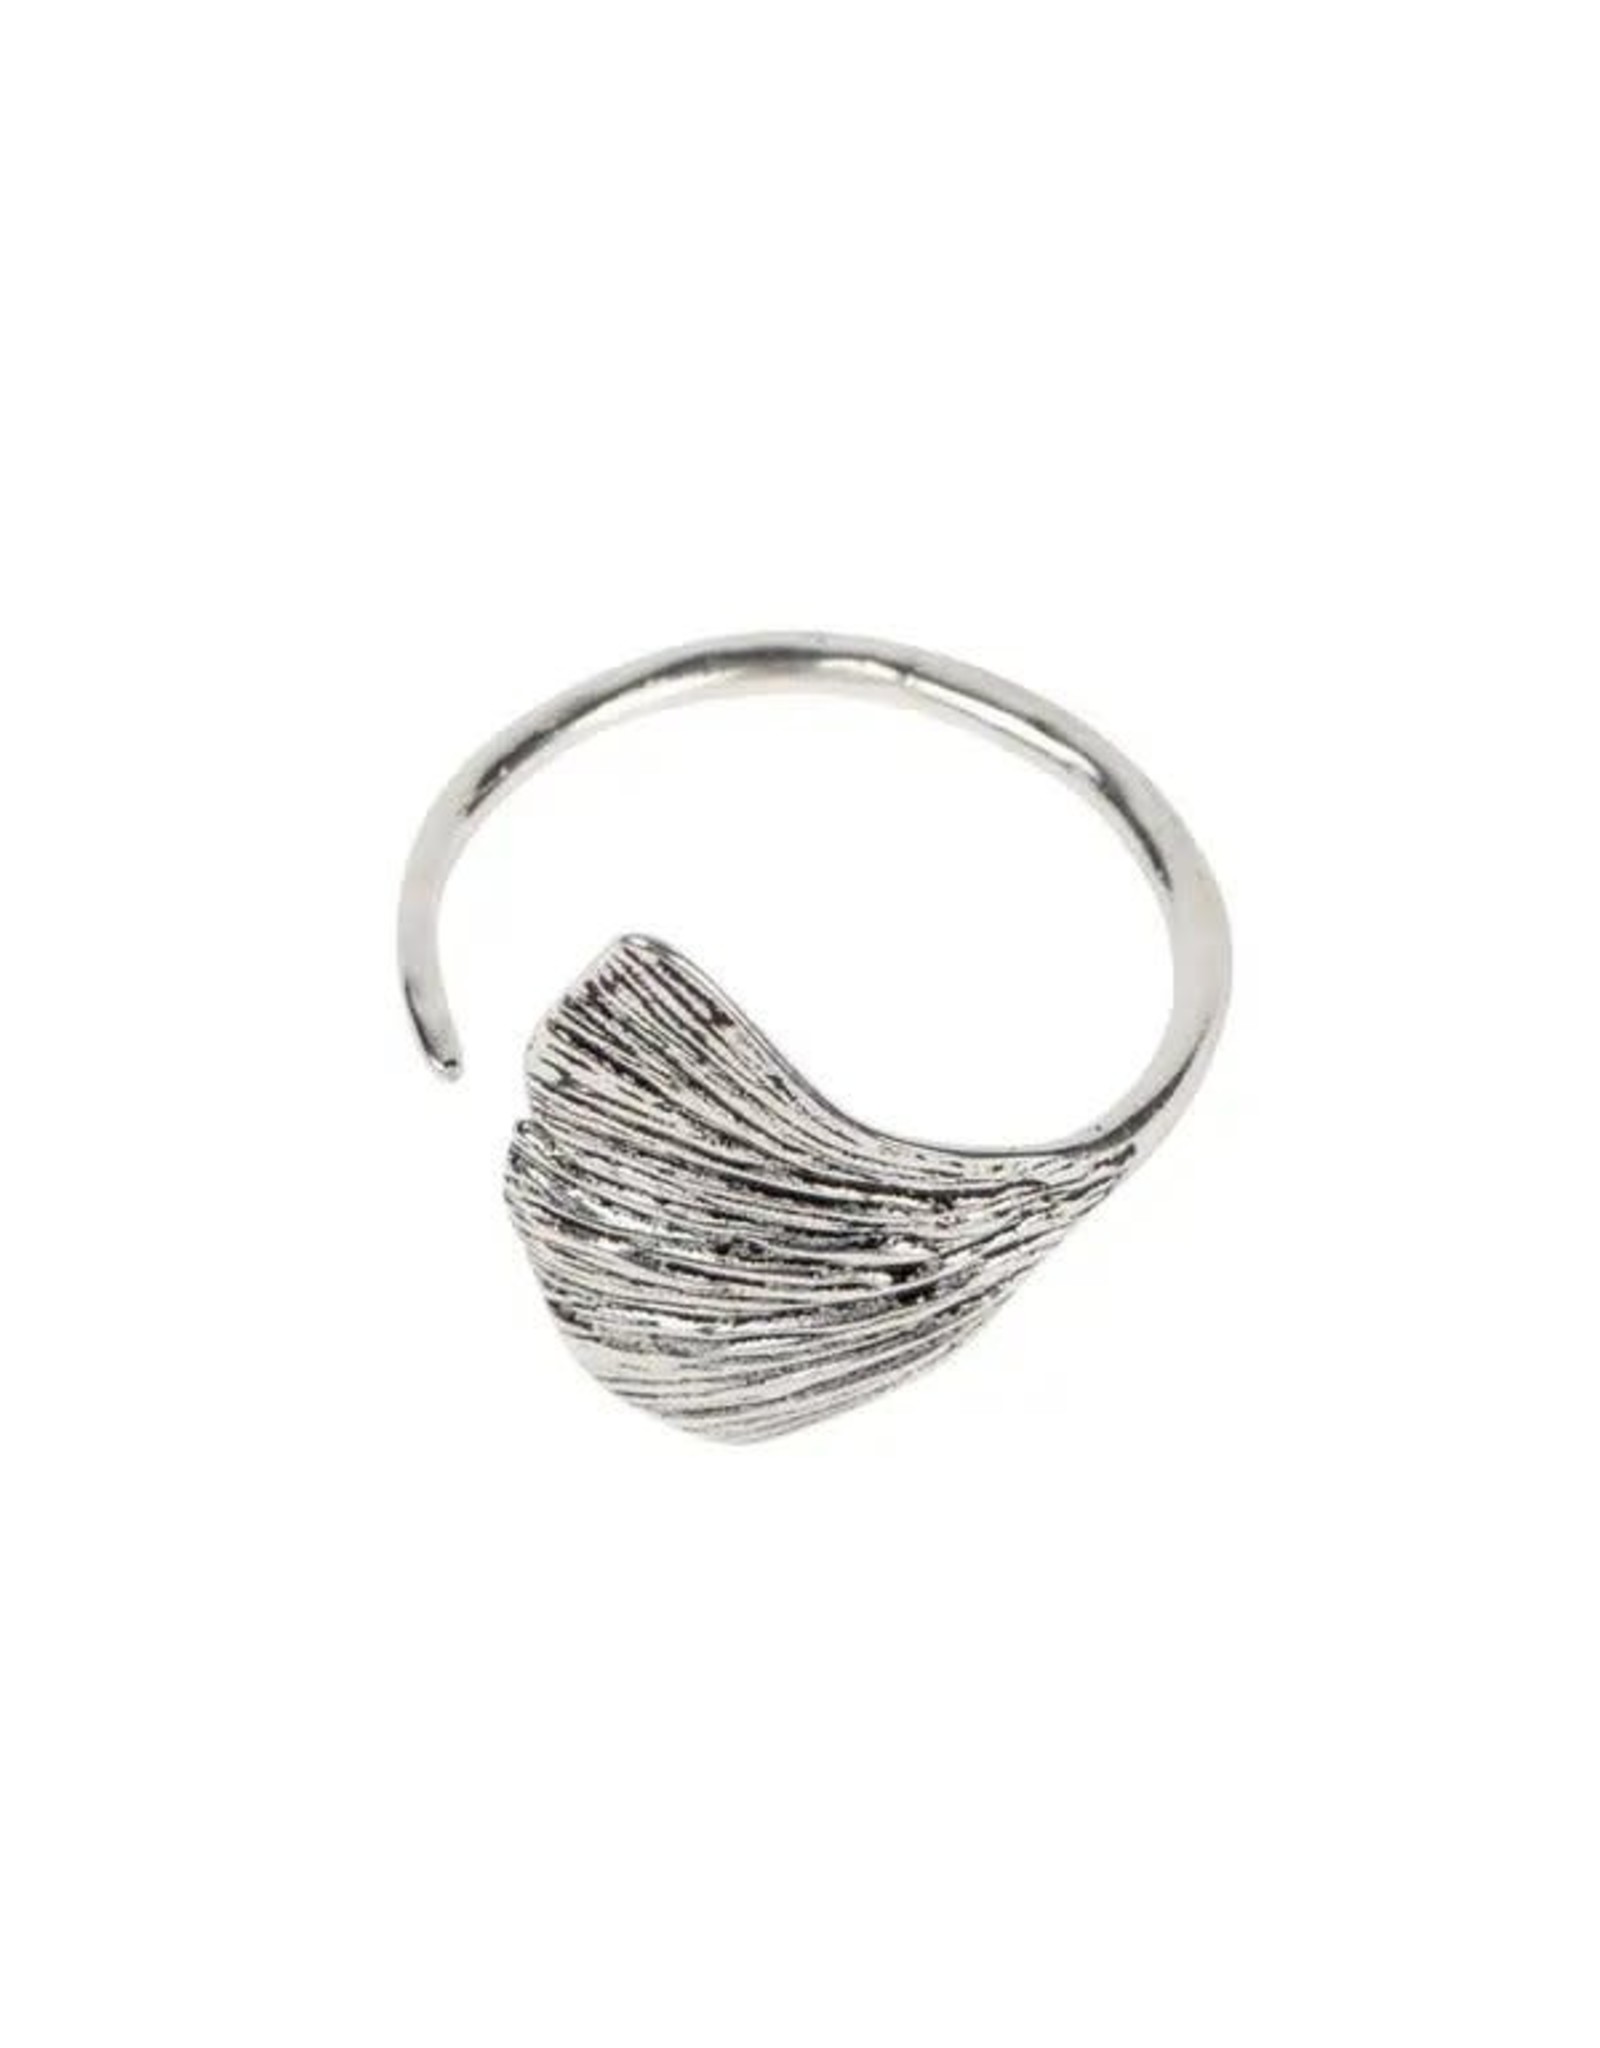 Trade roots Ginkgo Leaf Ring, Adjustable, India